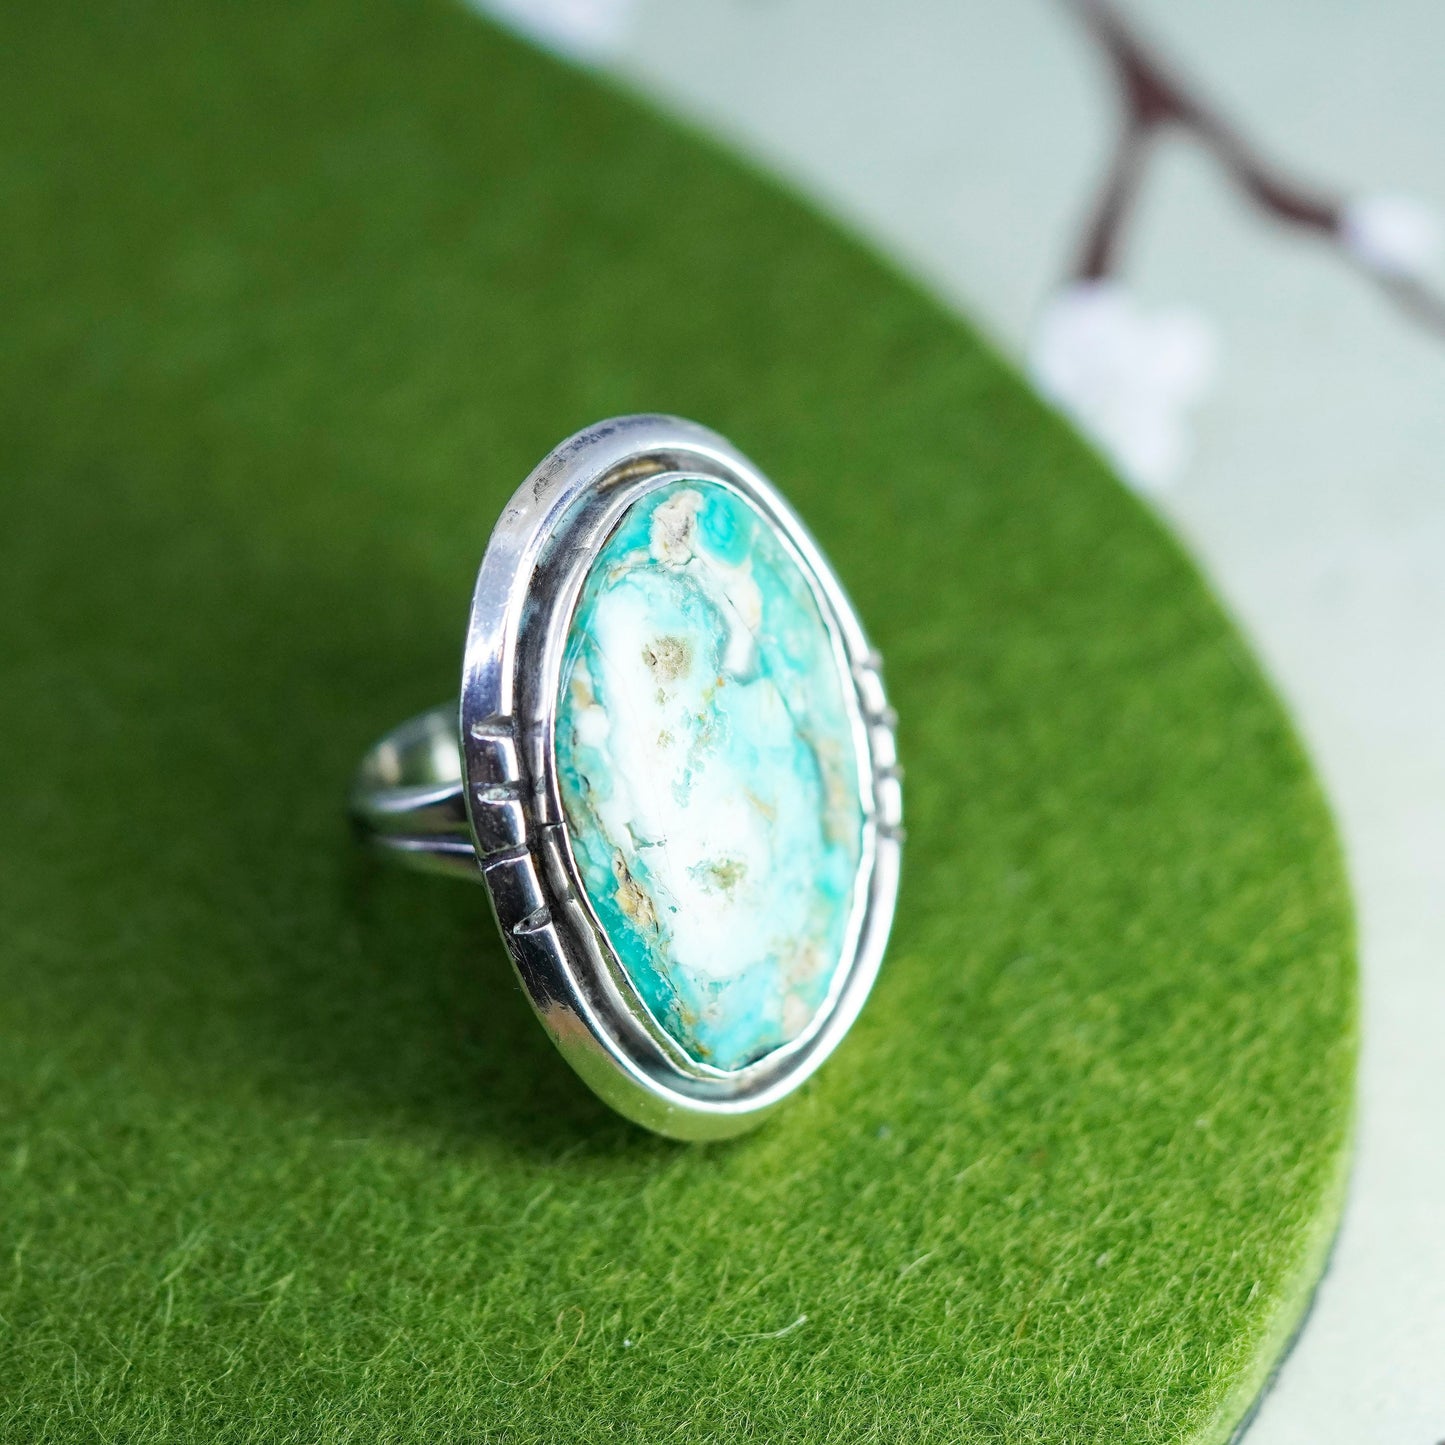 Size 5.75, Vintage sterling 925 silver handmade ring with oval shaped turquoise